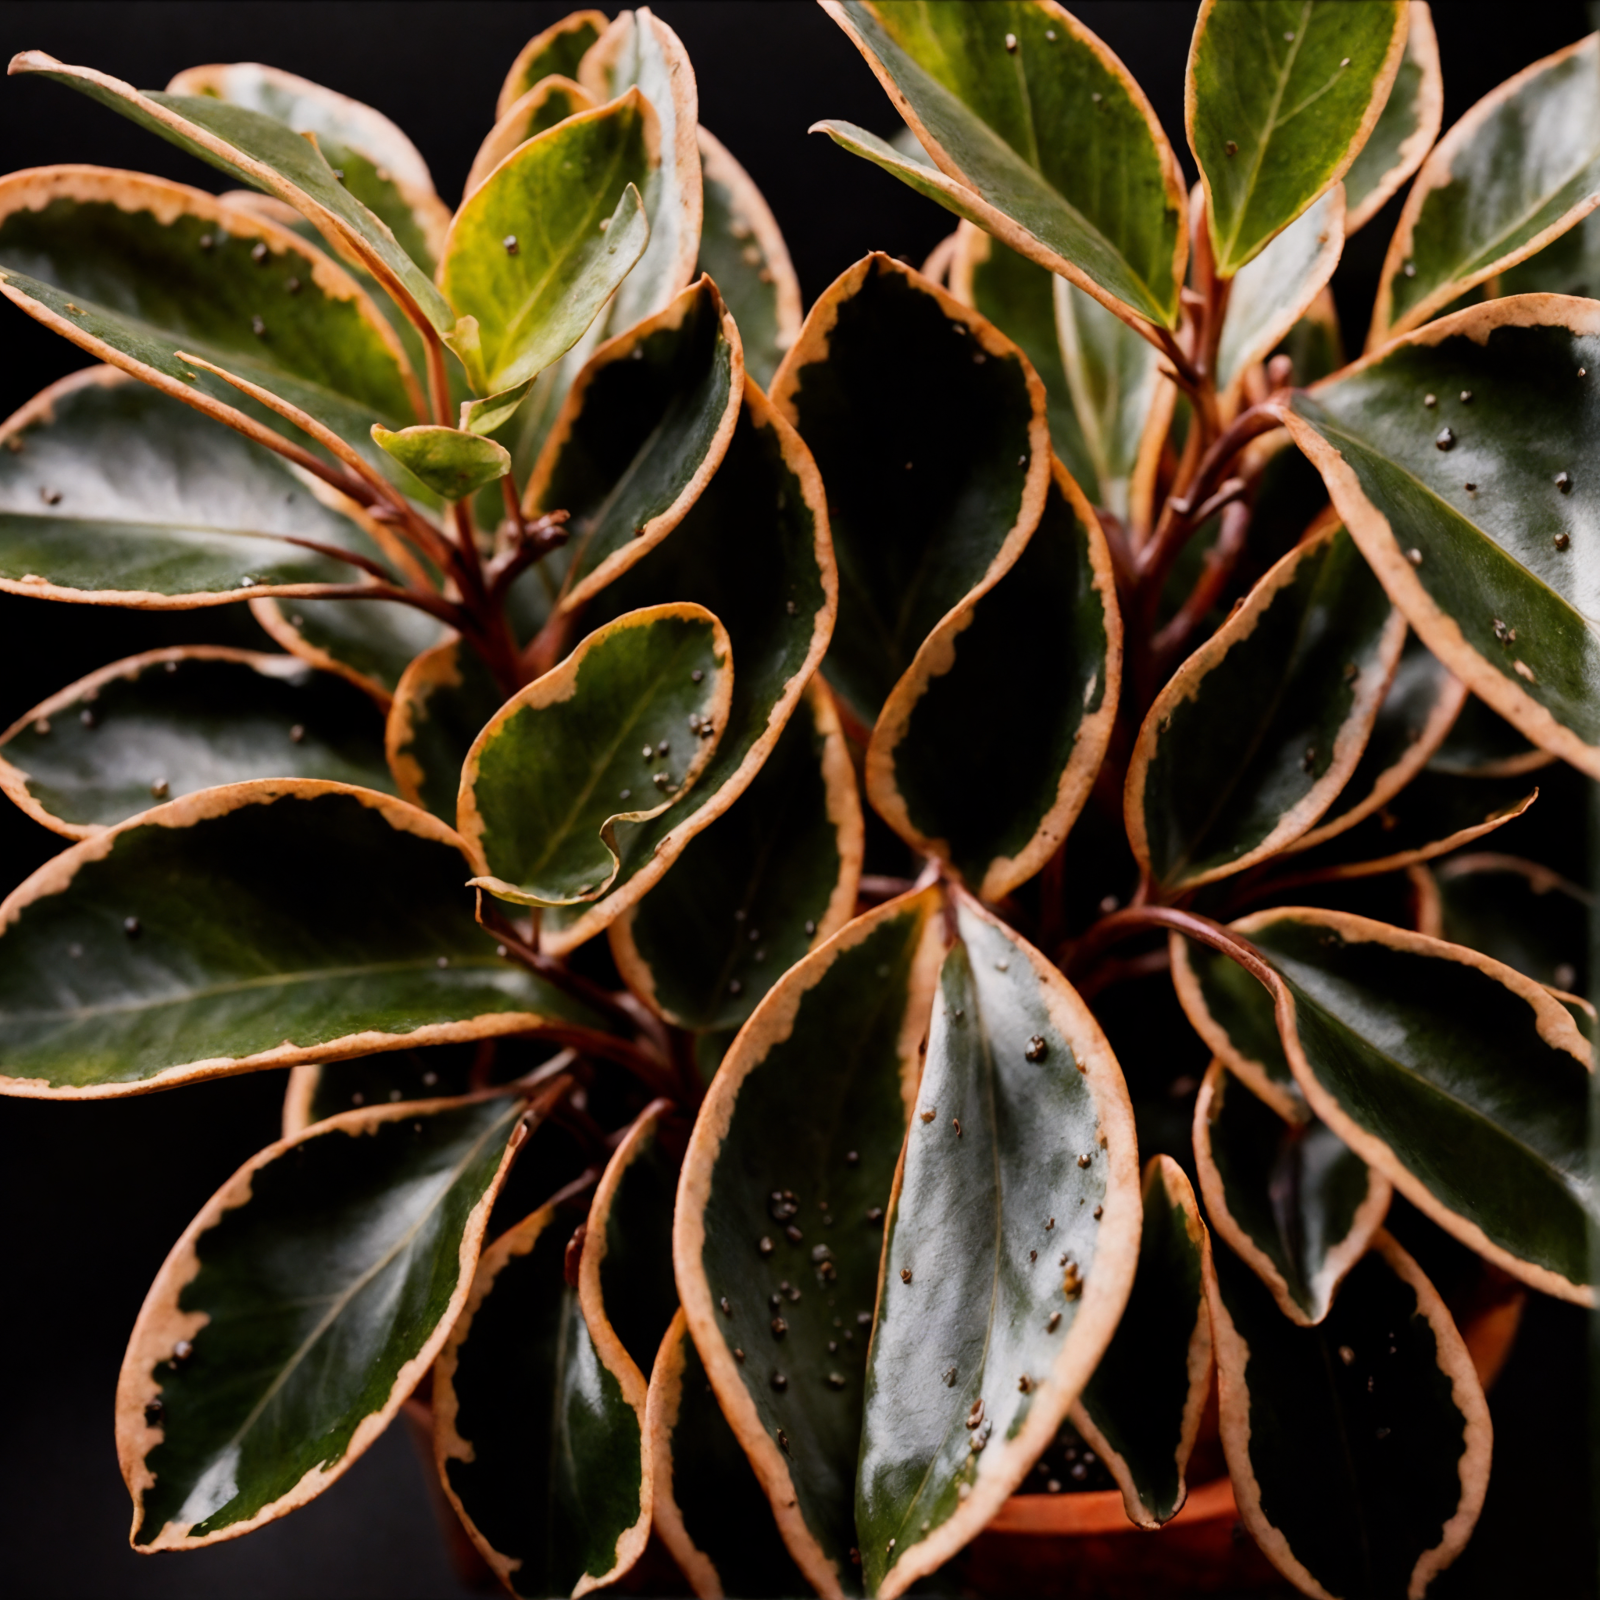 Peperomia clusiifolia with lush leaves in a pot, clear indoor lighting, against a dark background.